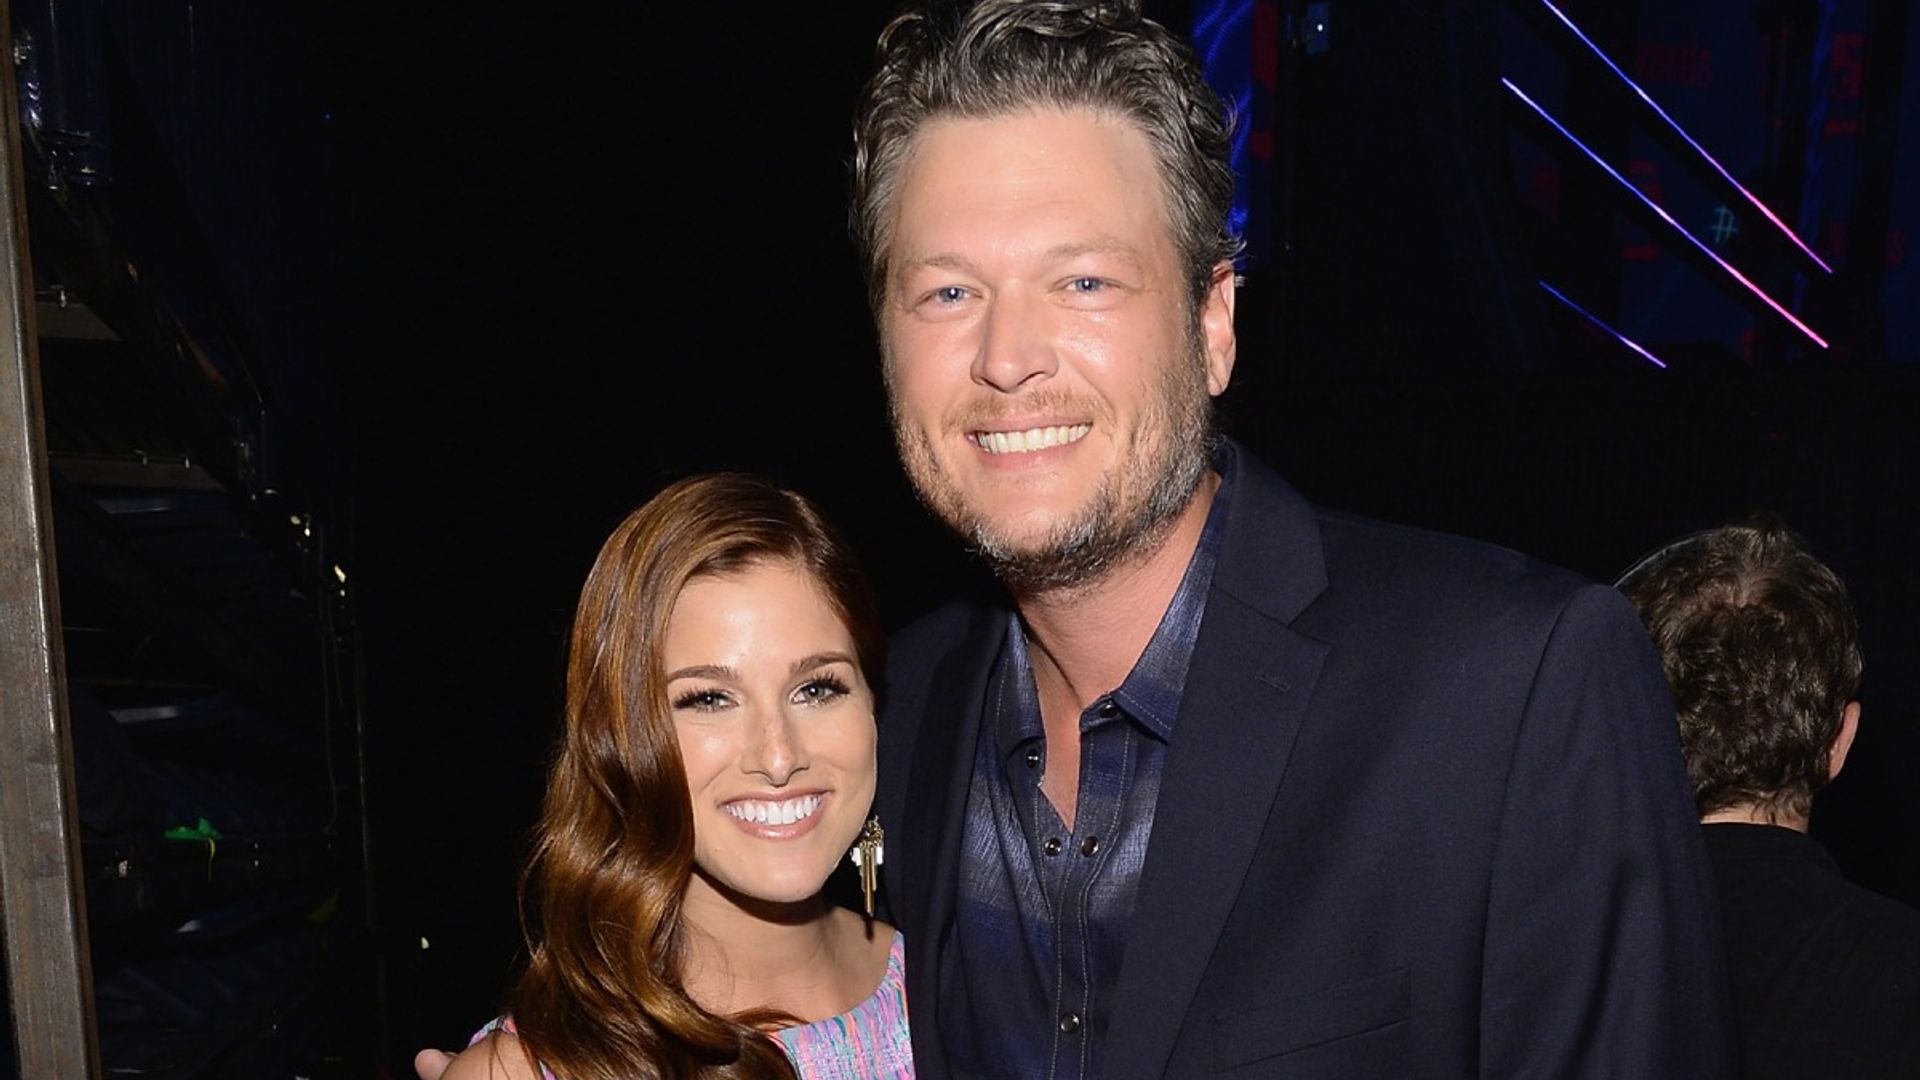 Exclusive: Blake Shelton's 'real' character revealed by Cassadee Pope to HELLO!